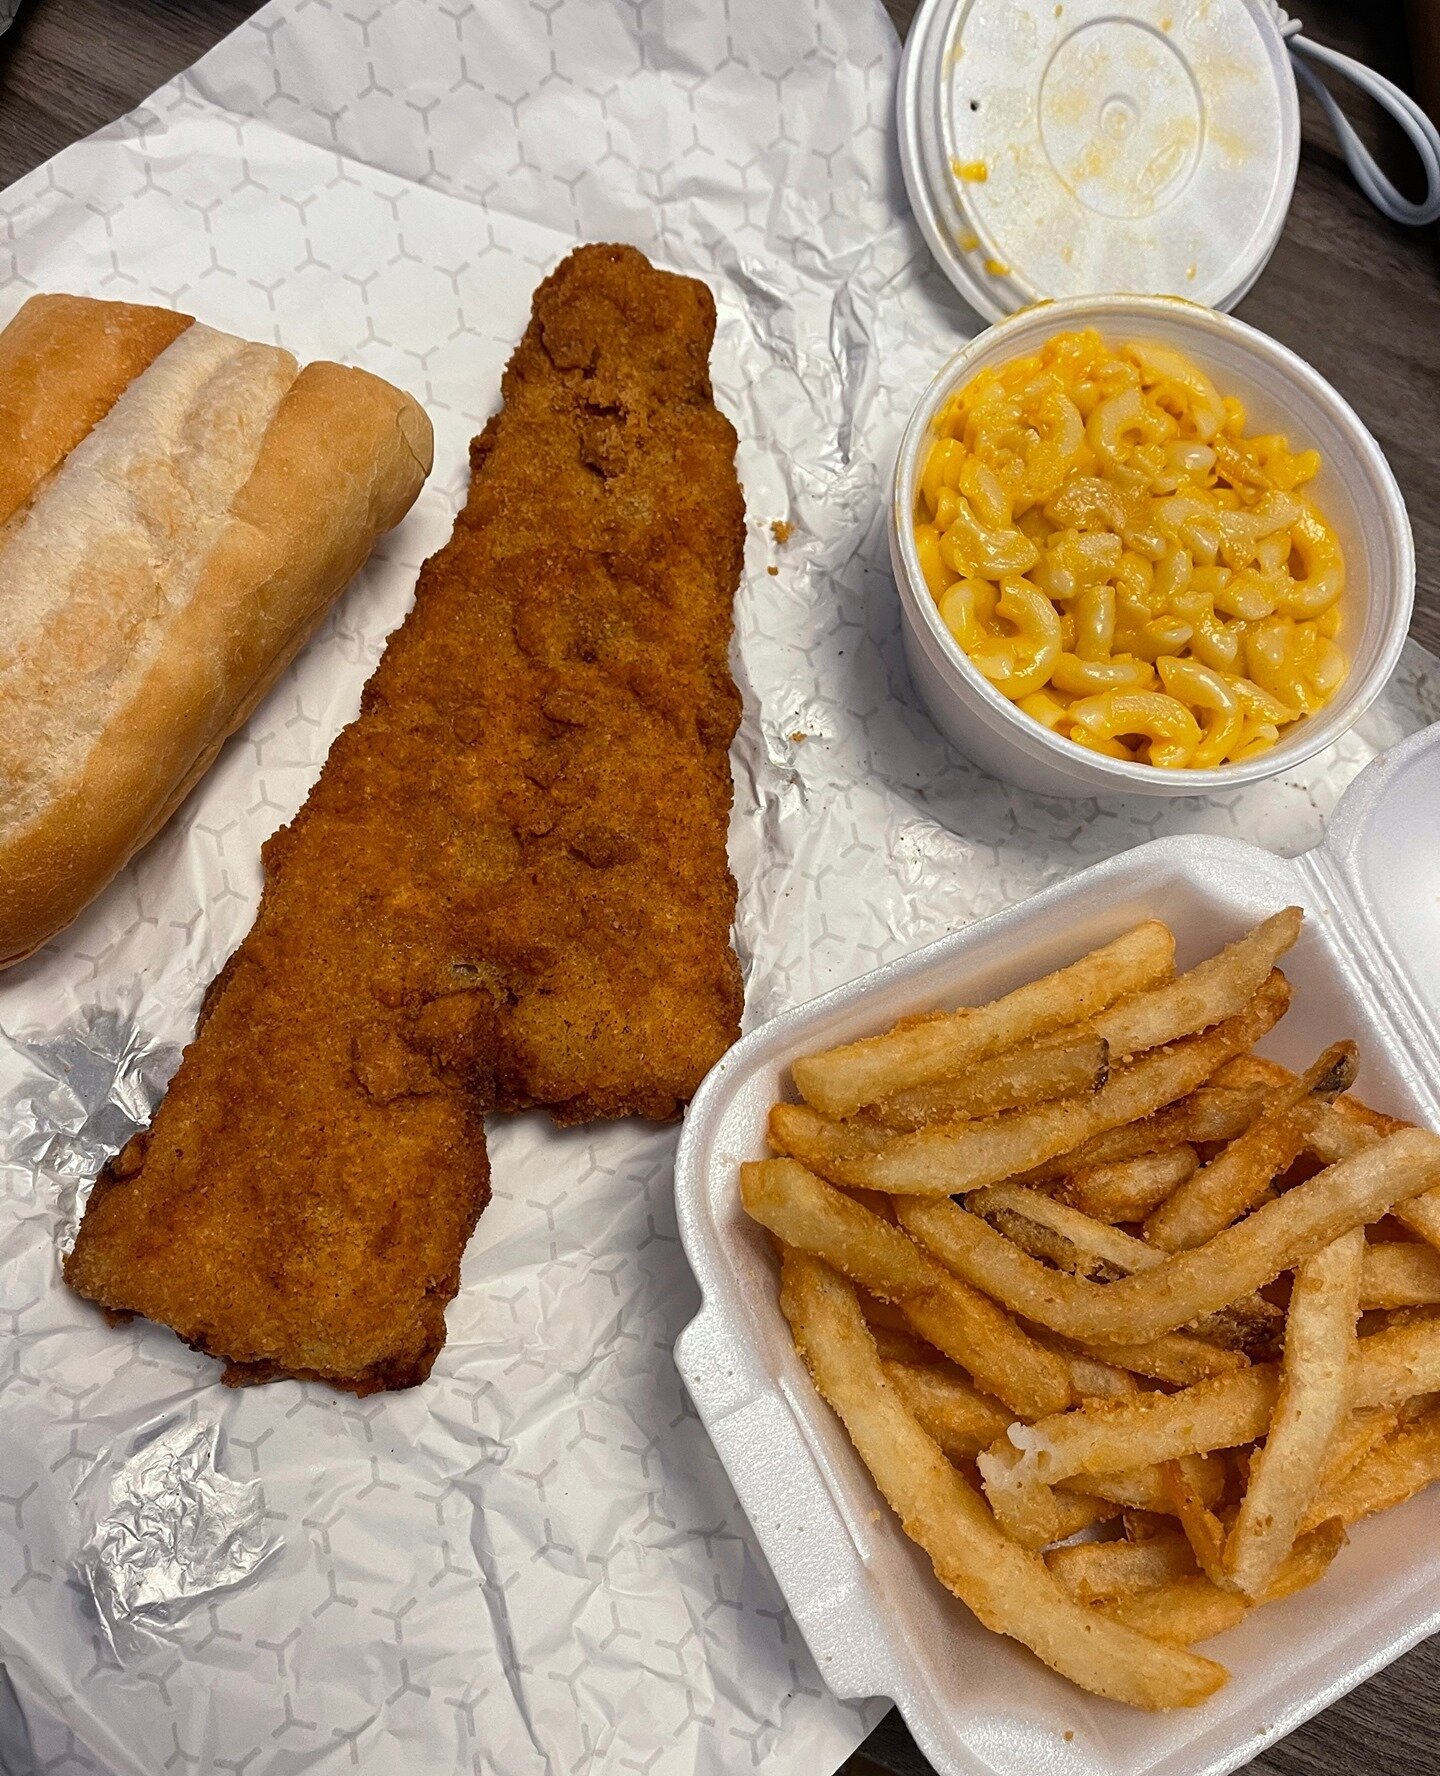 Only a few Fridays left for Fish Fry! Where are you ordering from! This is our local church St. Anne's and every year it doesn't disappoint. 🐟